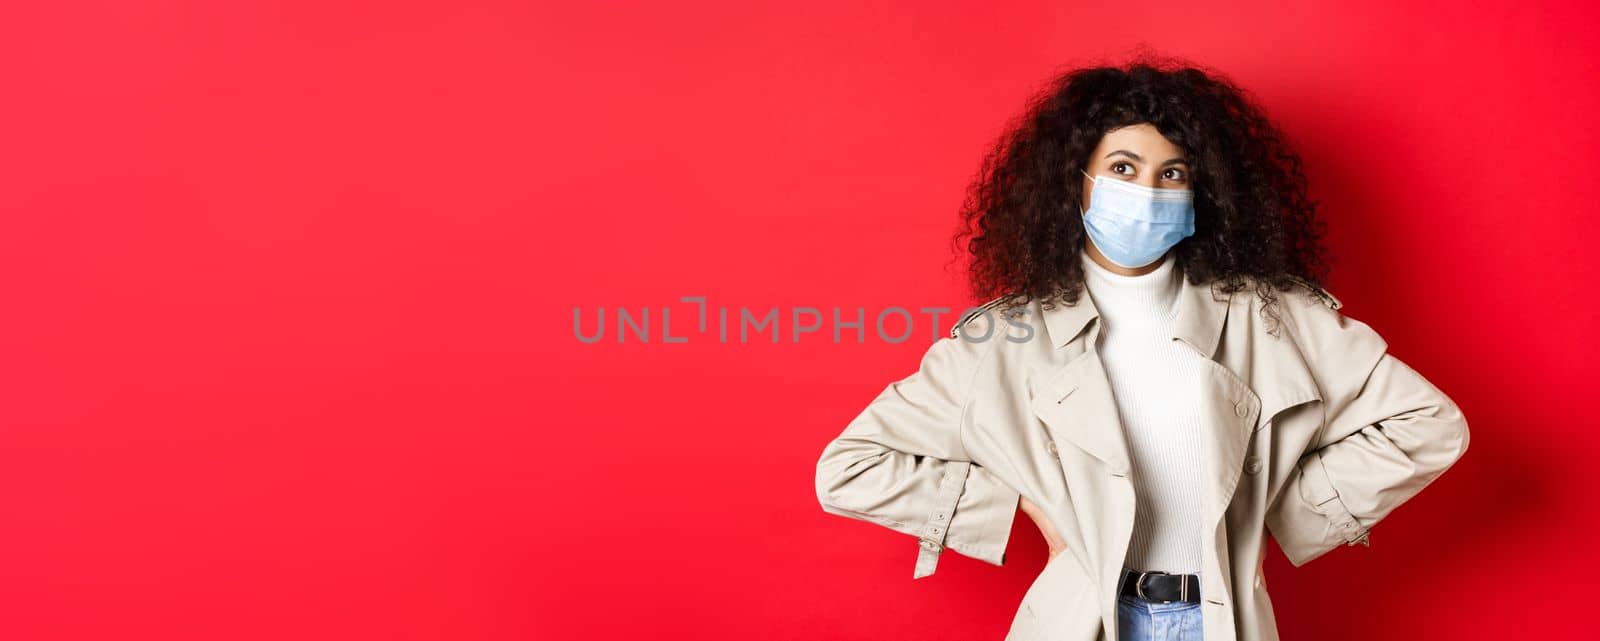 Covid-19, pandemic and quarantine concept. Stylish enthusiastic woman in medical mask and trench coat, smiling and looking at upper left corner, red background by Benzoix